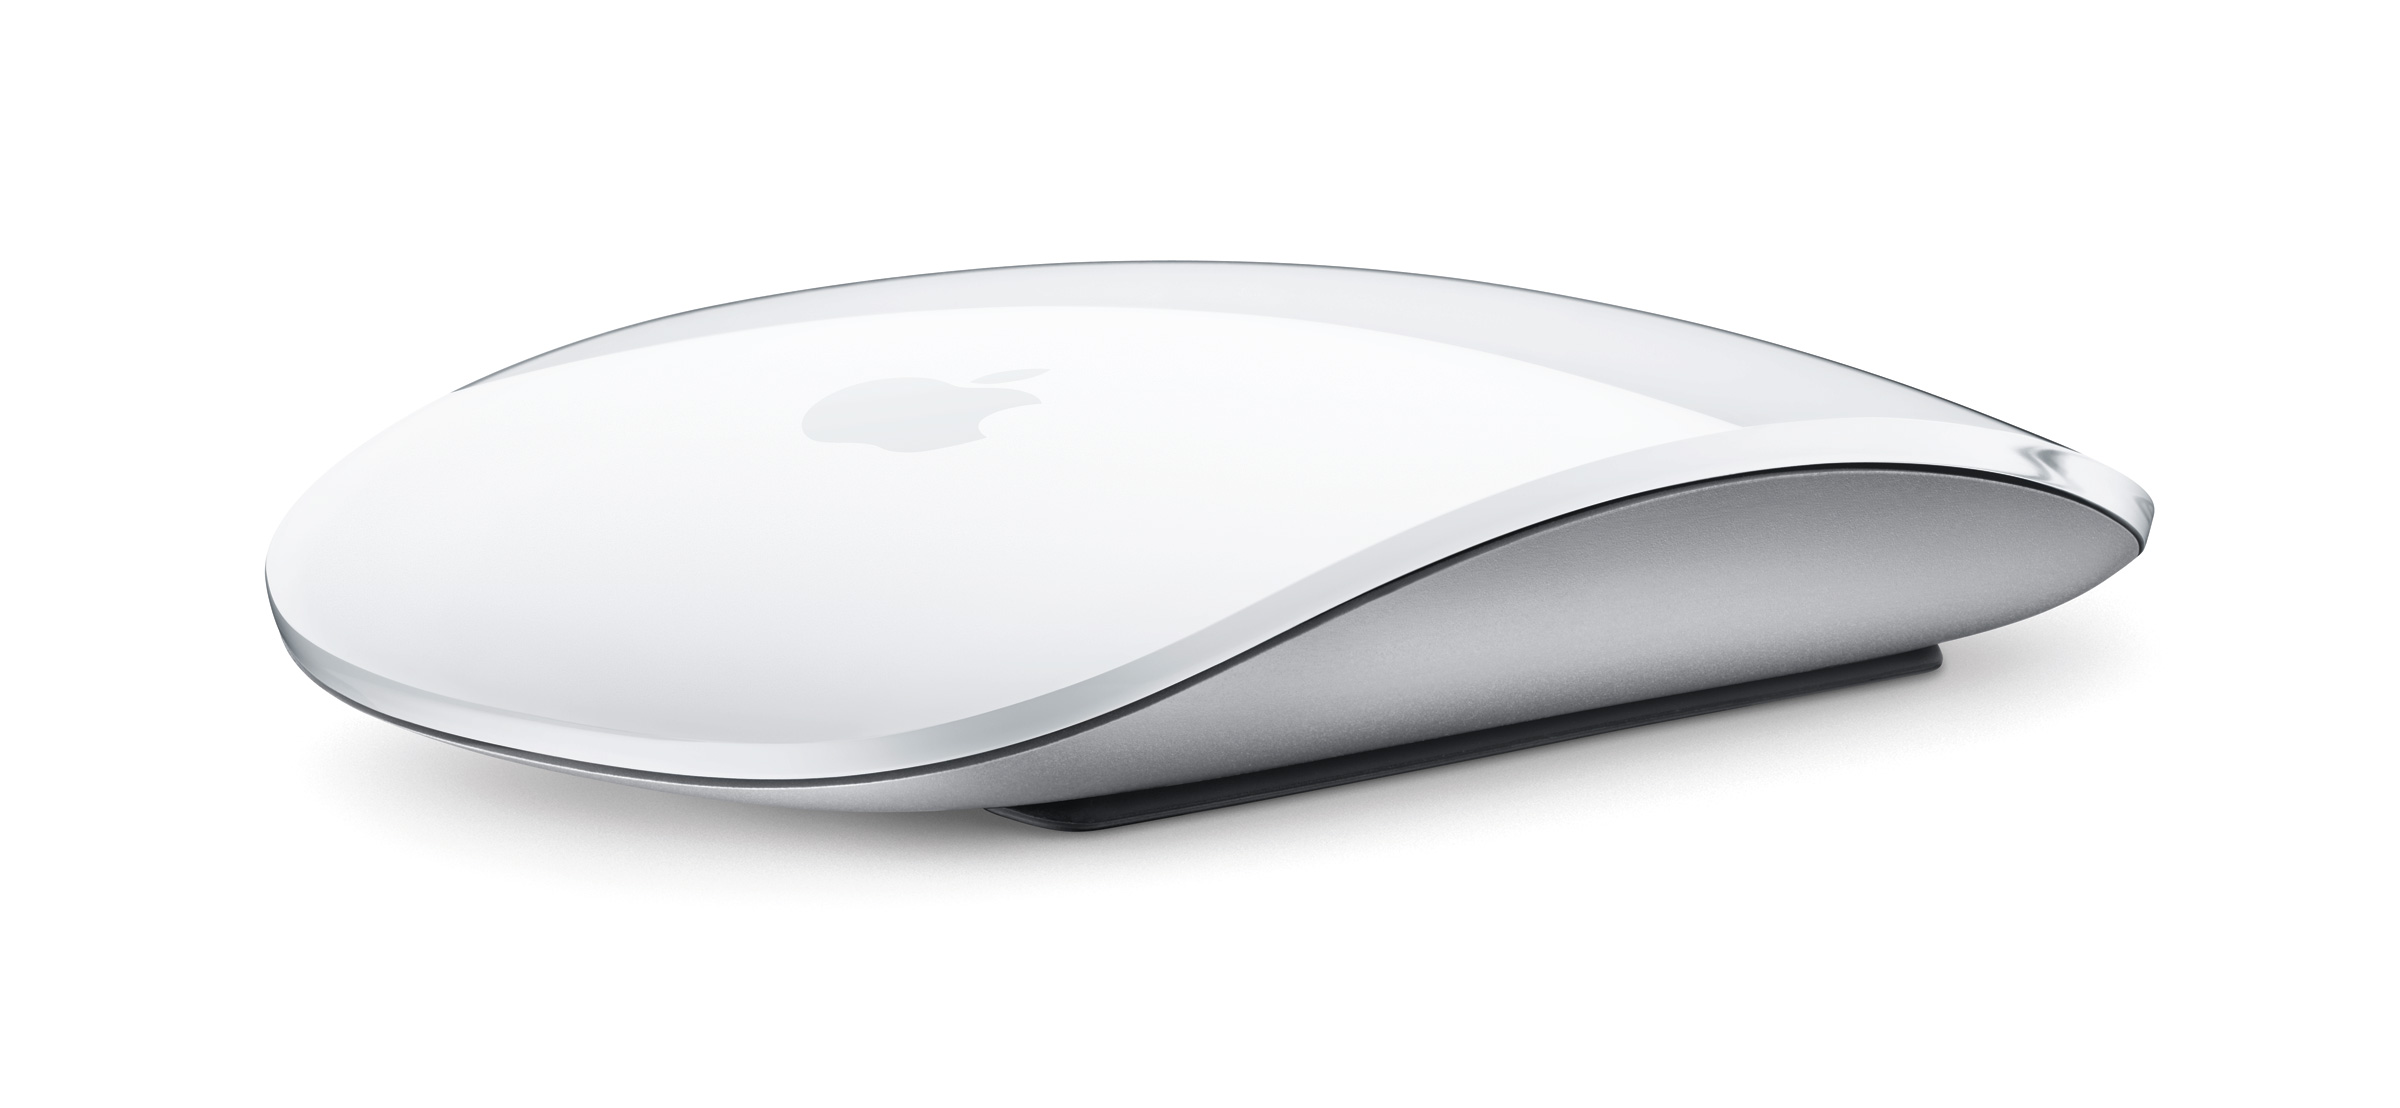 Apple Introduces Buttonless, Multi-Touch Magic Mouse